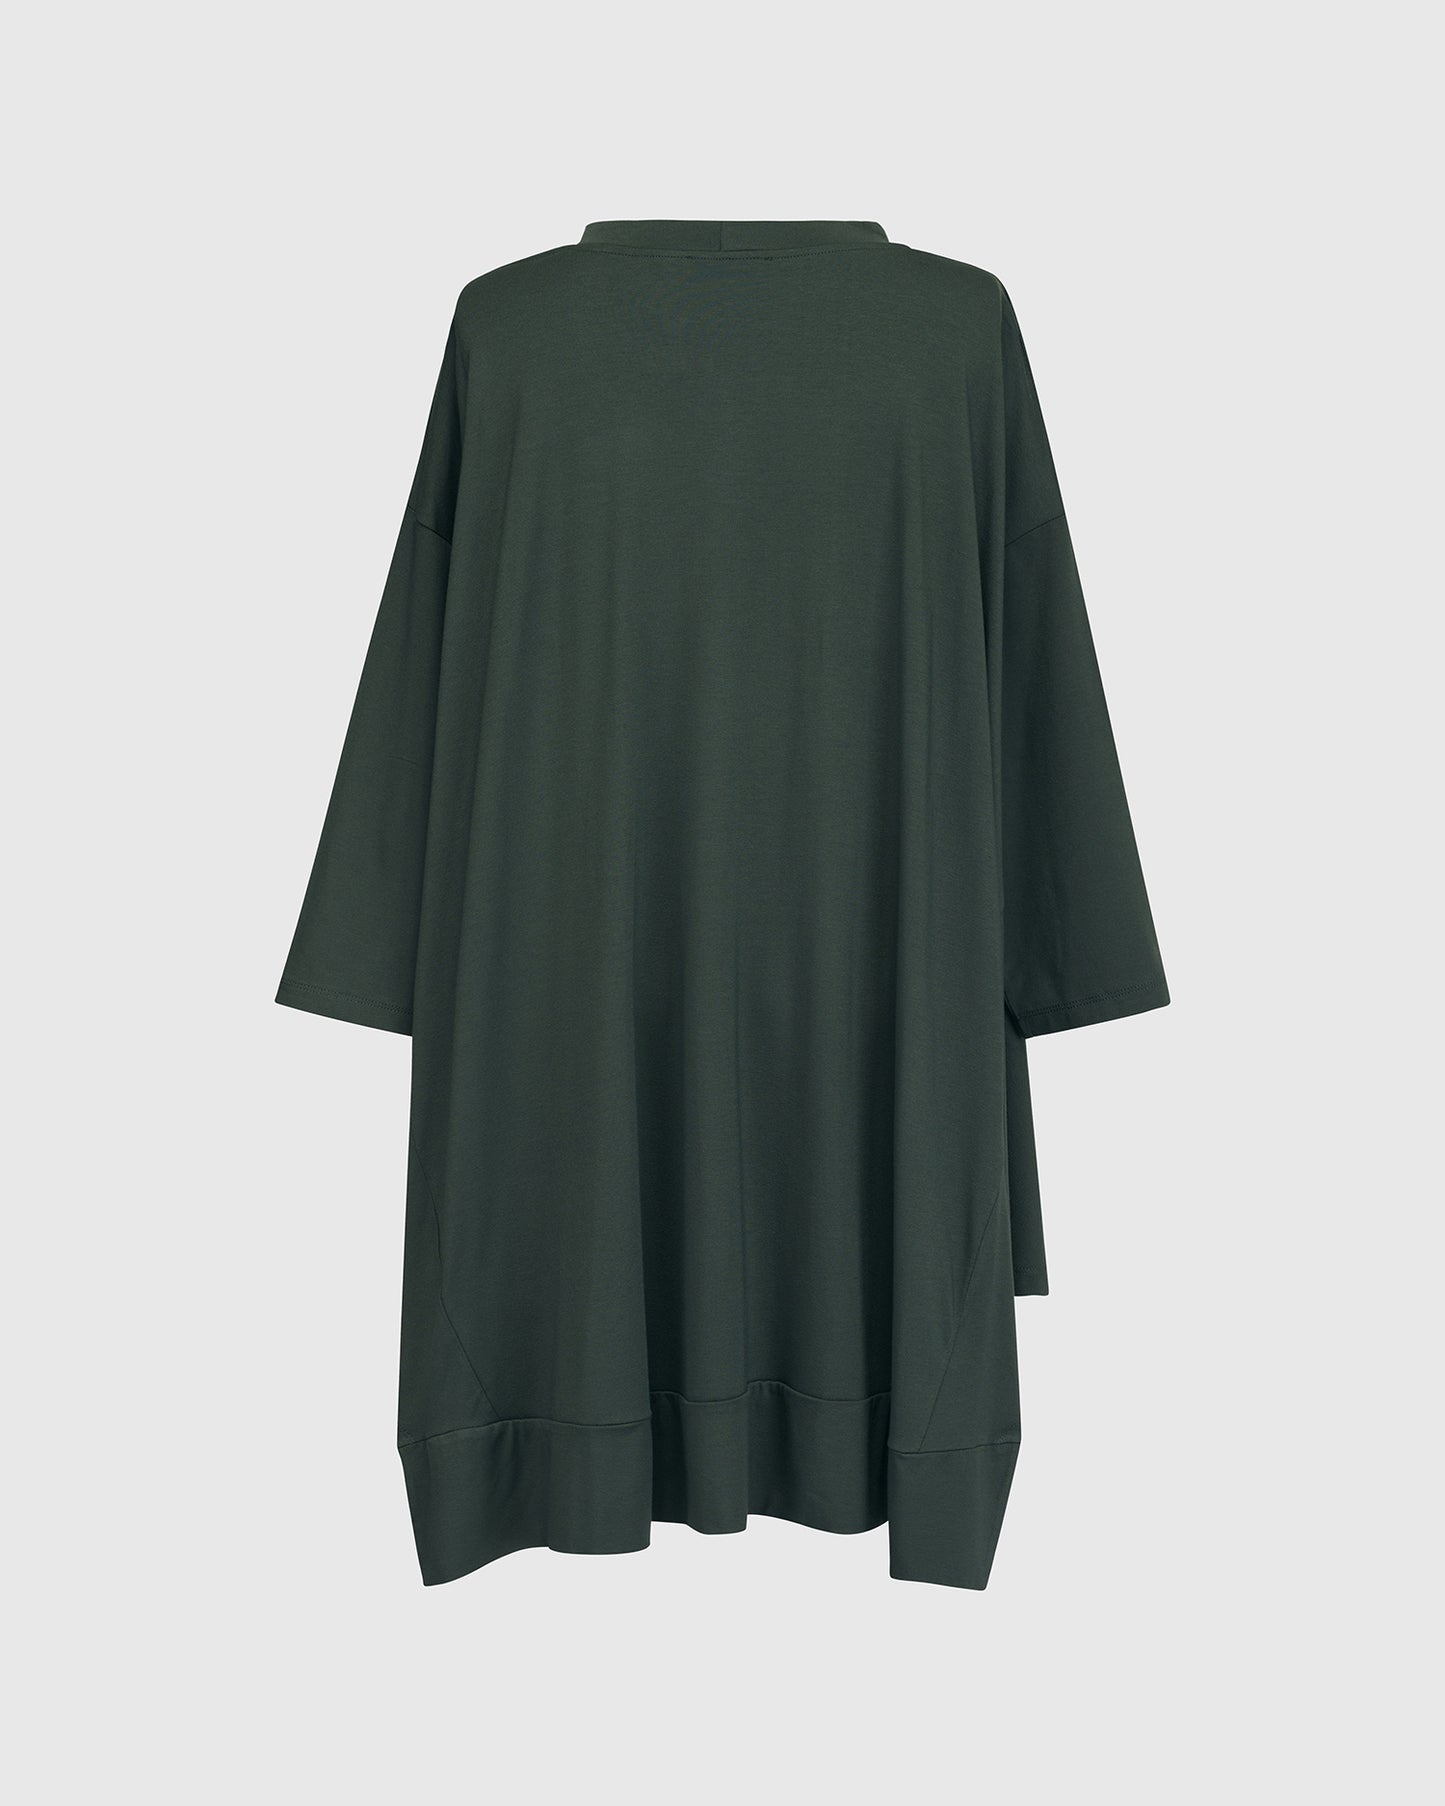 Essential Oversized Trapeze Top, Green by Alembika